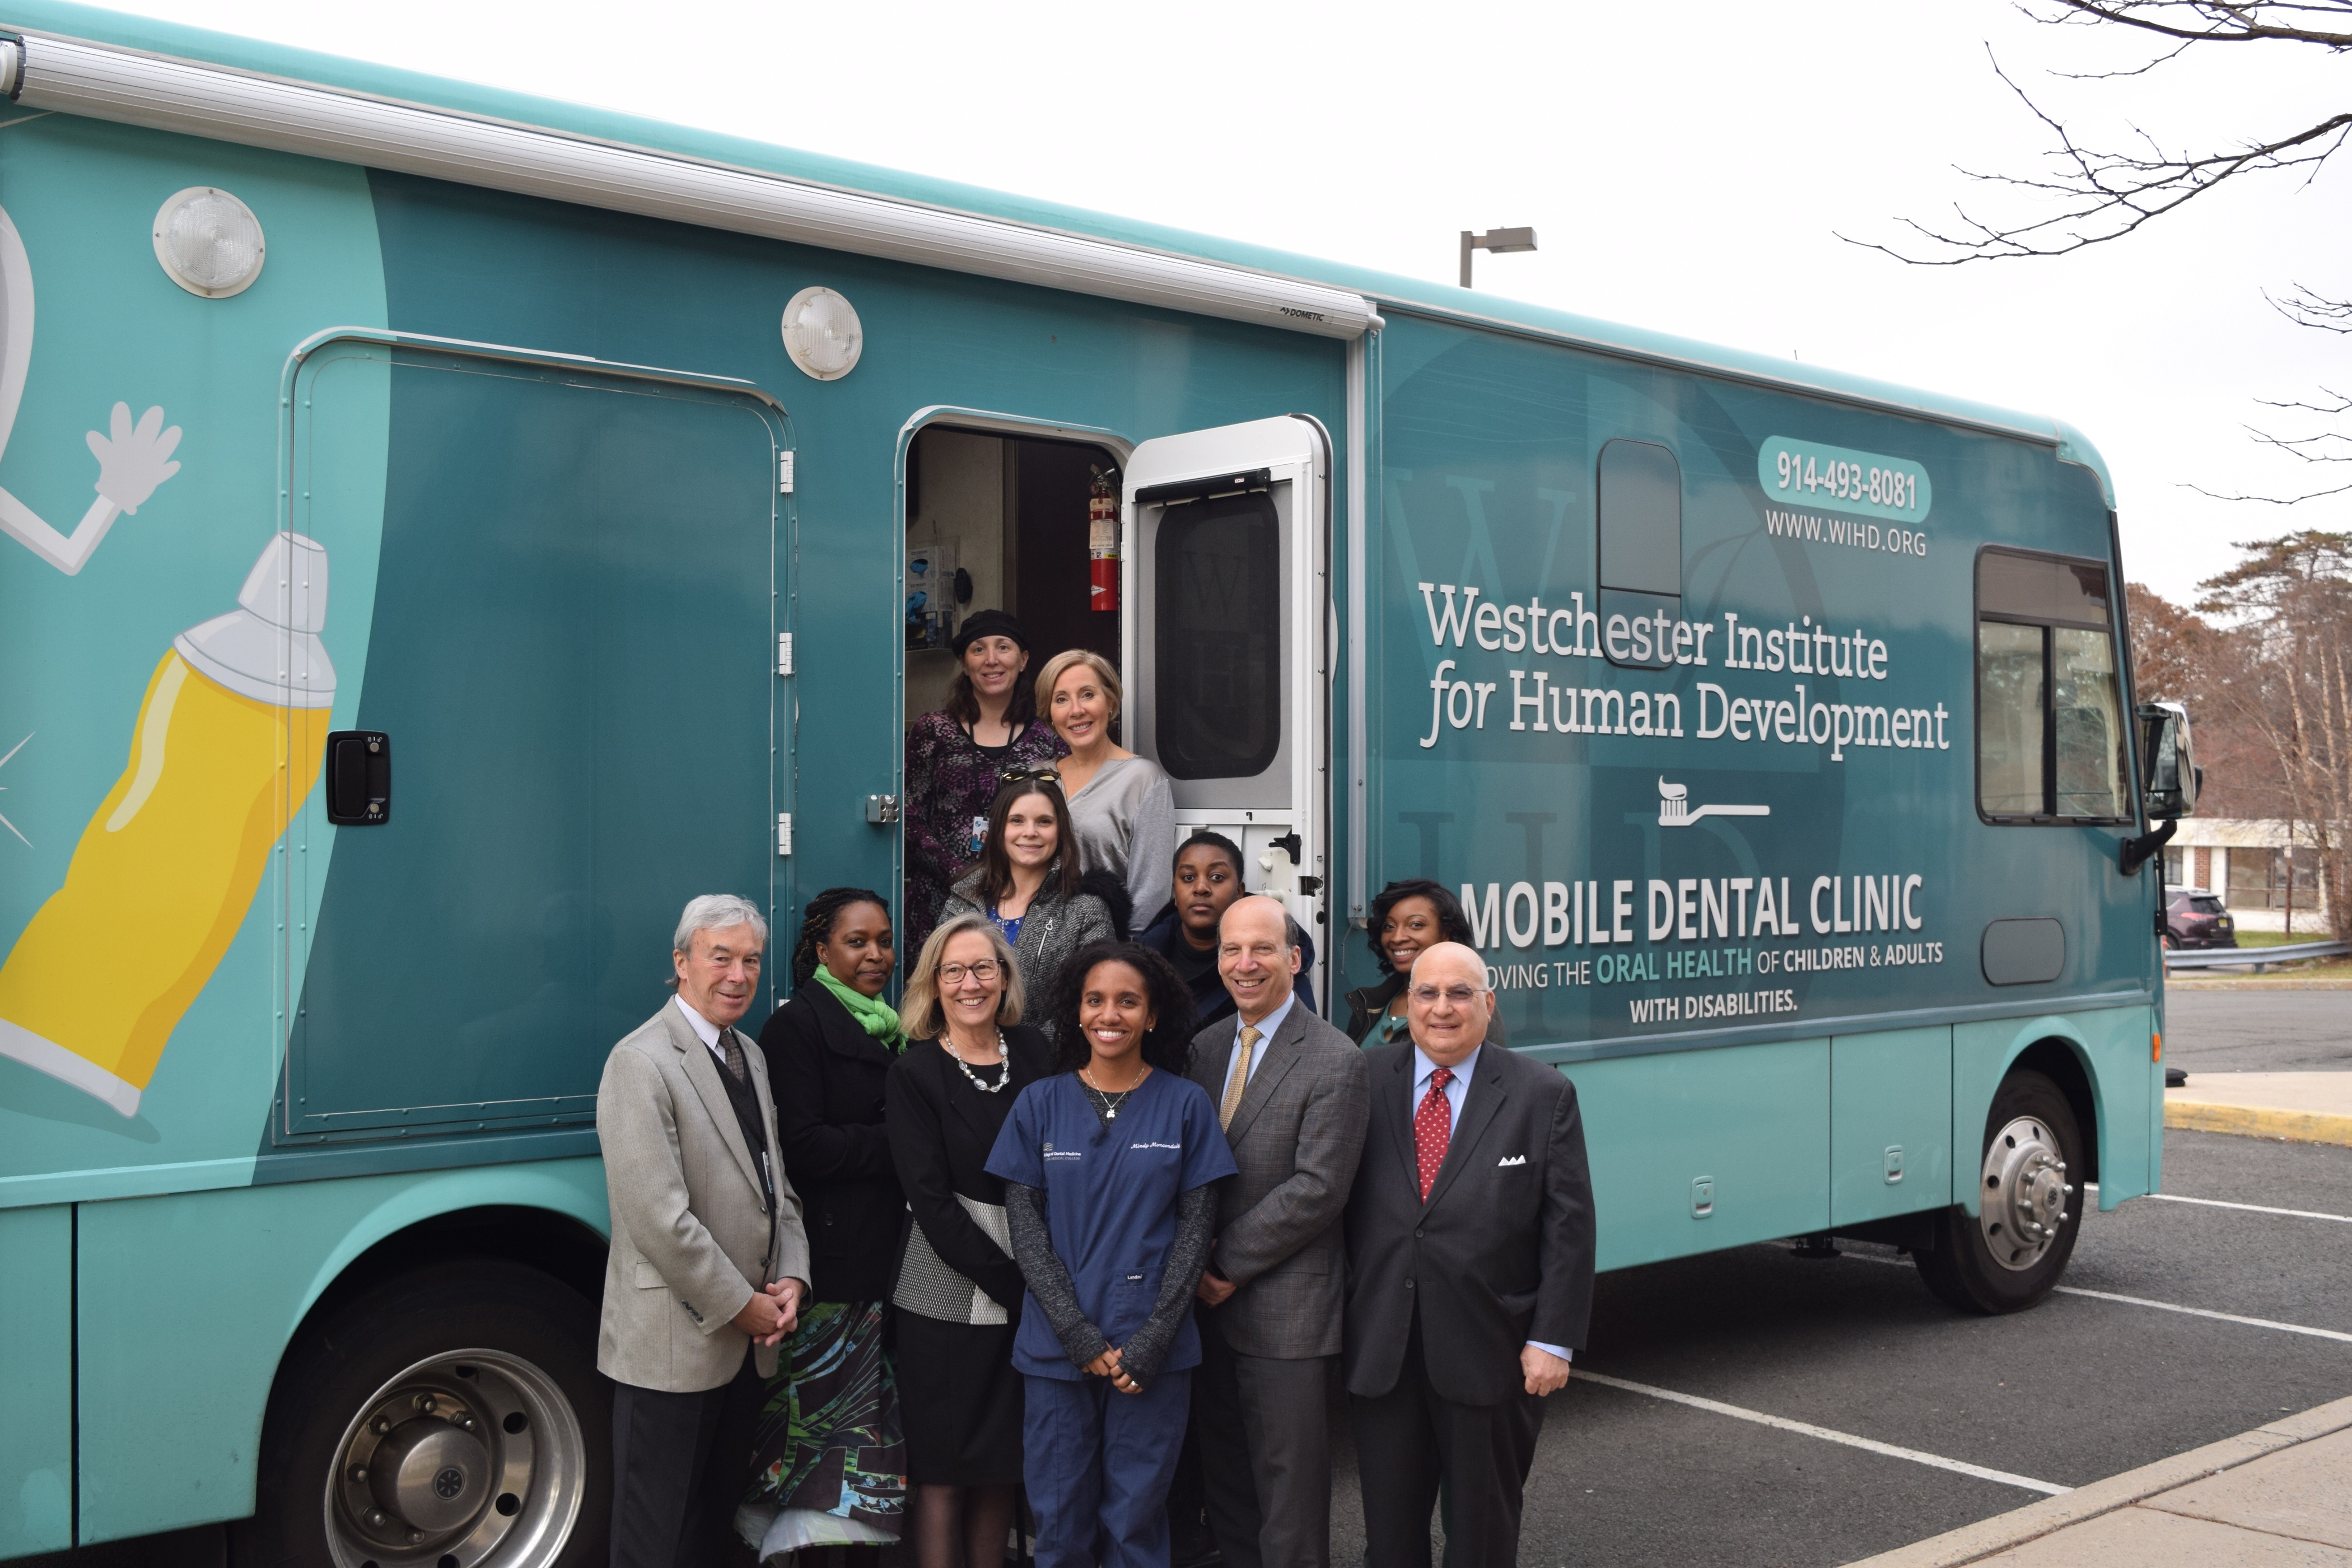 Group Photo in front of Bus labeled: Westchester Institute for Human Development Mobile Dental Clinic 